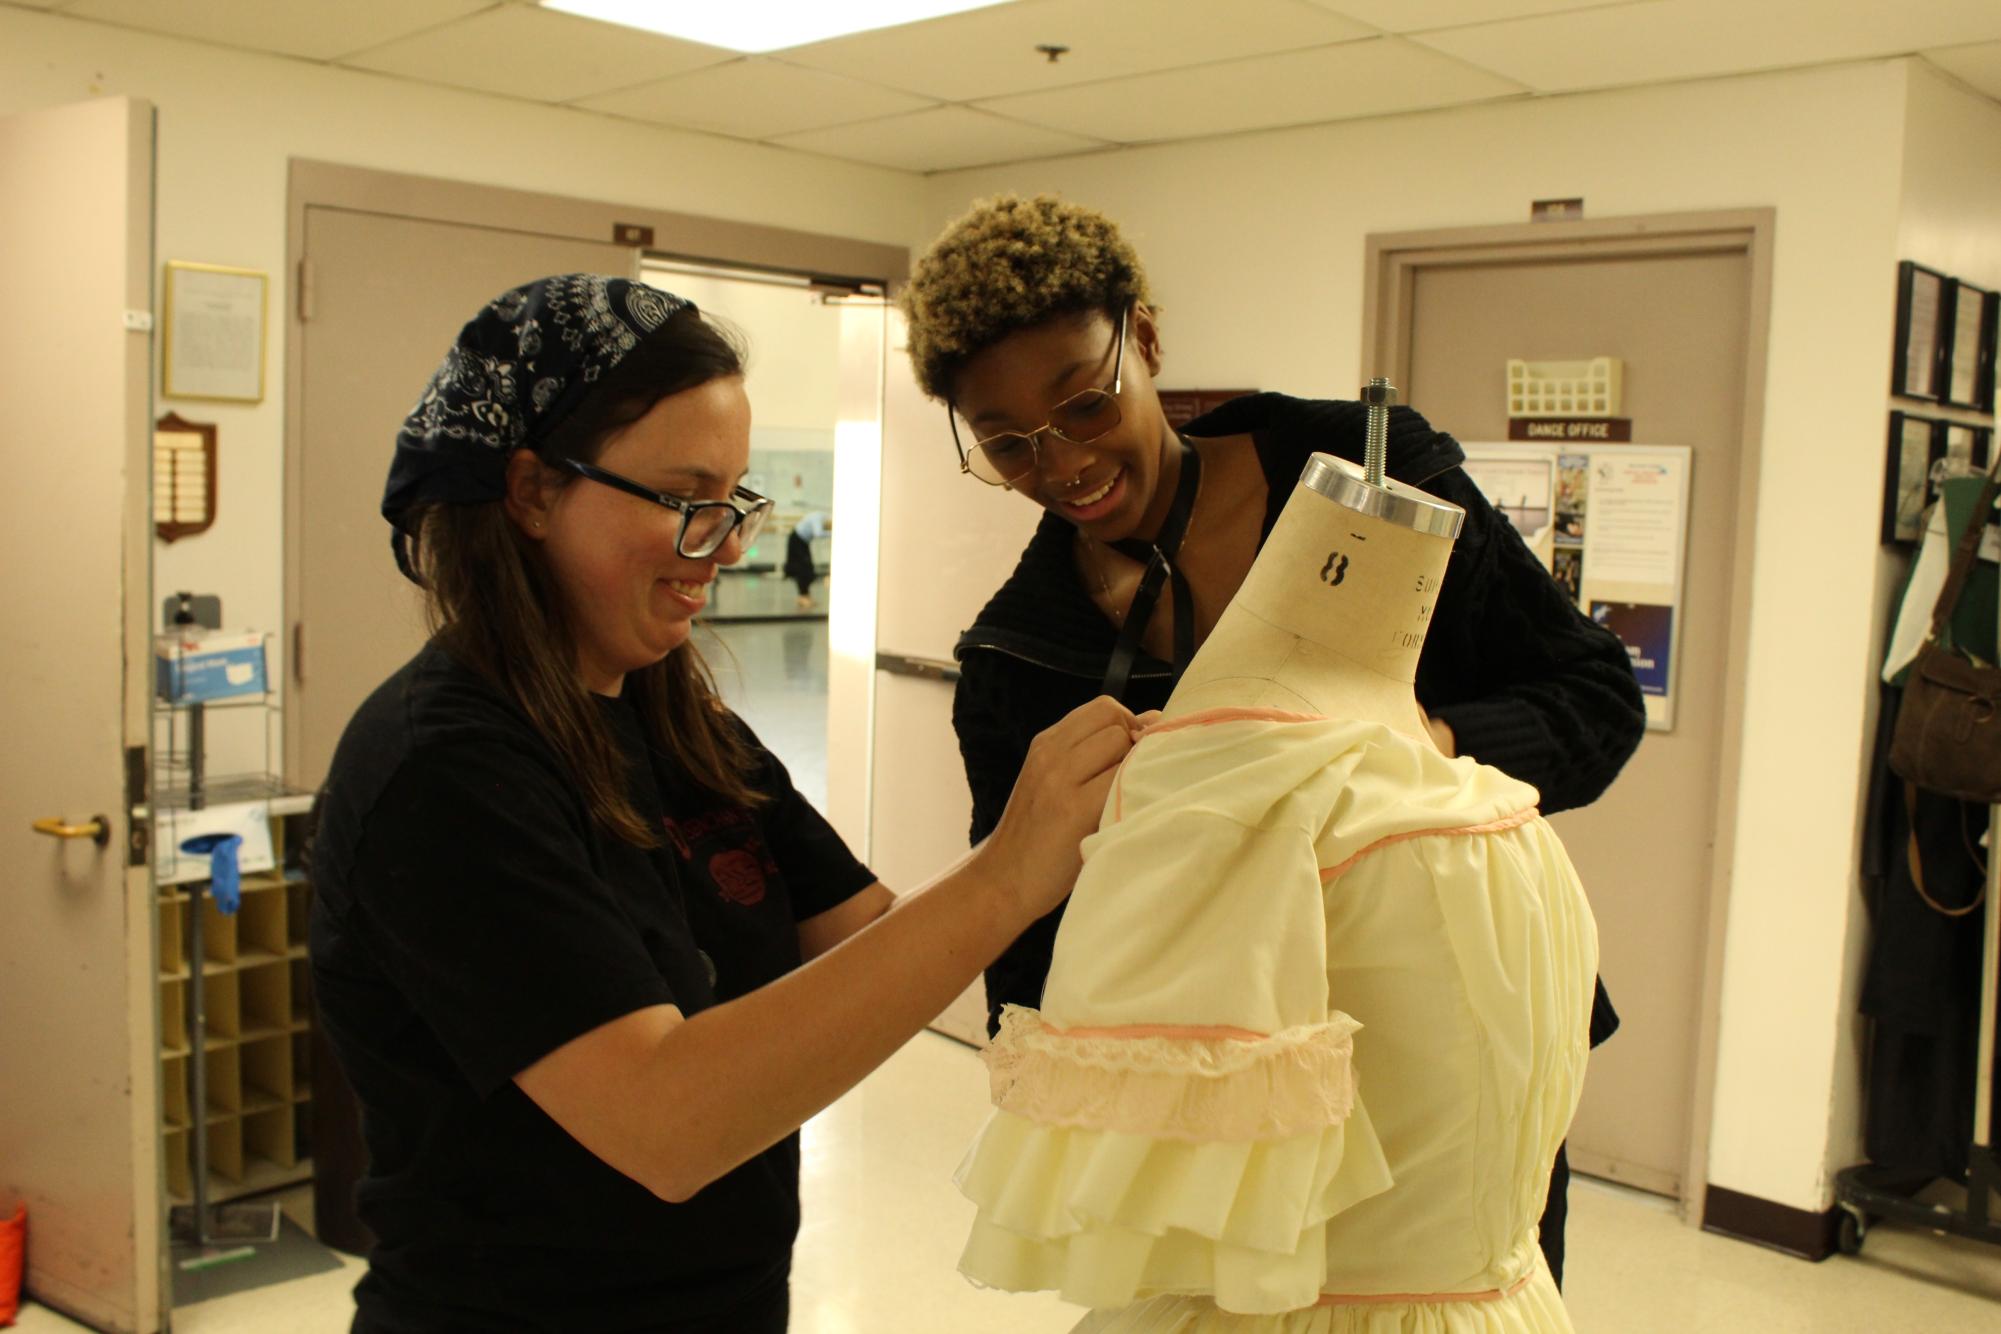 Costume construction and creation crew members Rhiann Olshane and Noa Walker staging a handcrafted dress on the opening night of "Sweeney Todd: The Demon Barber of Fleet Street" on March 14, 2024.